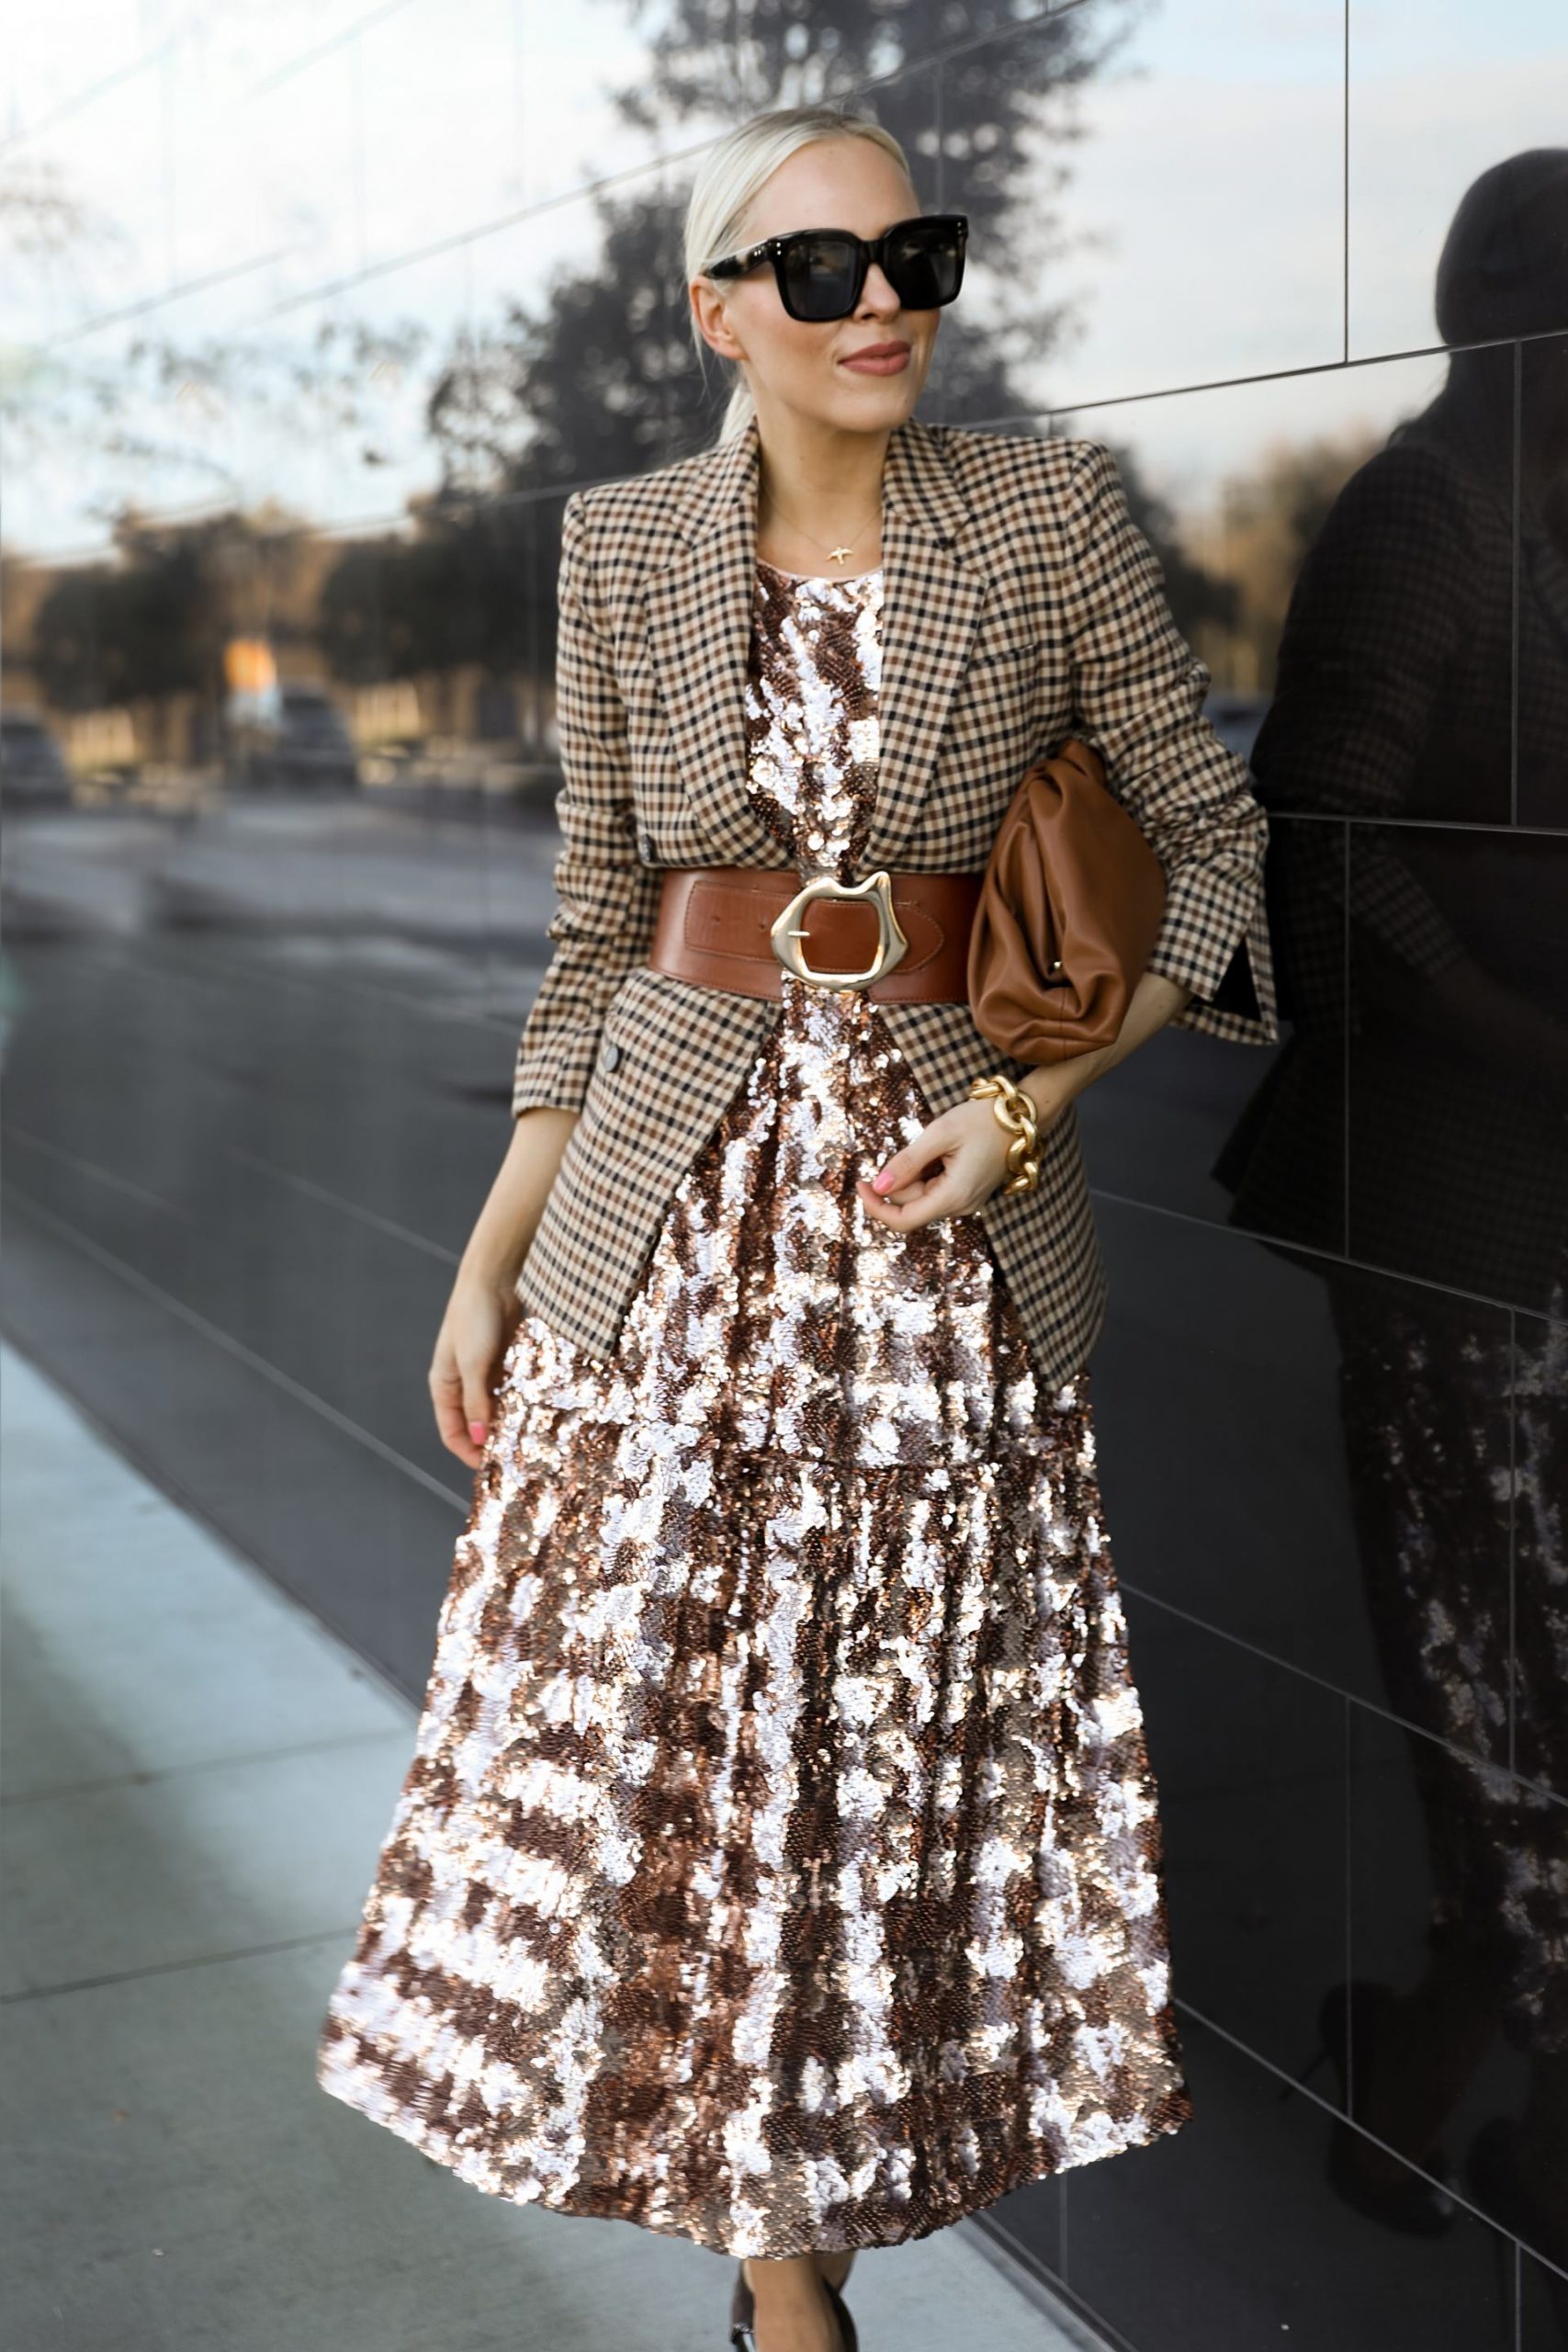 How to style your sequin pieces after the holidays, by San Francisco fashion blogger Lombard & Fifth. Anthropologie Bernadette Sequined midi dress.